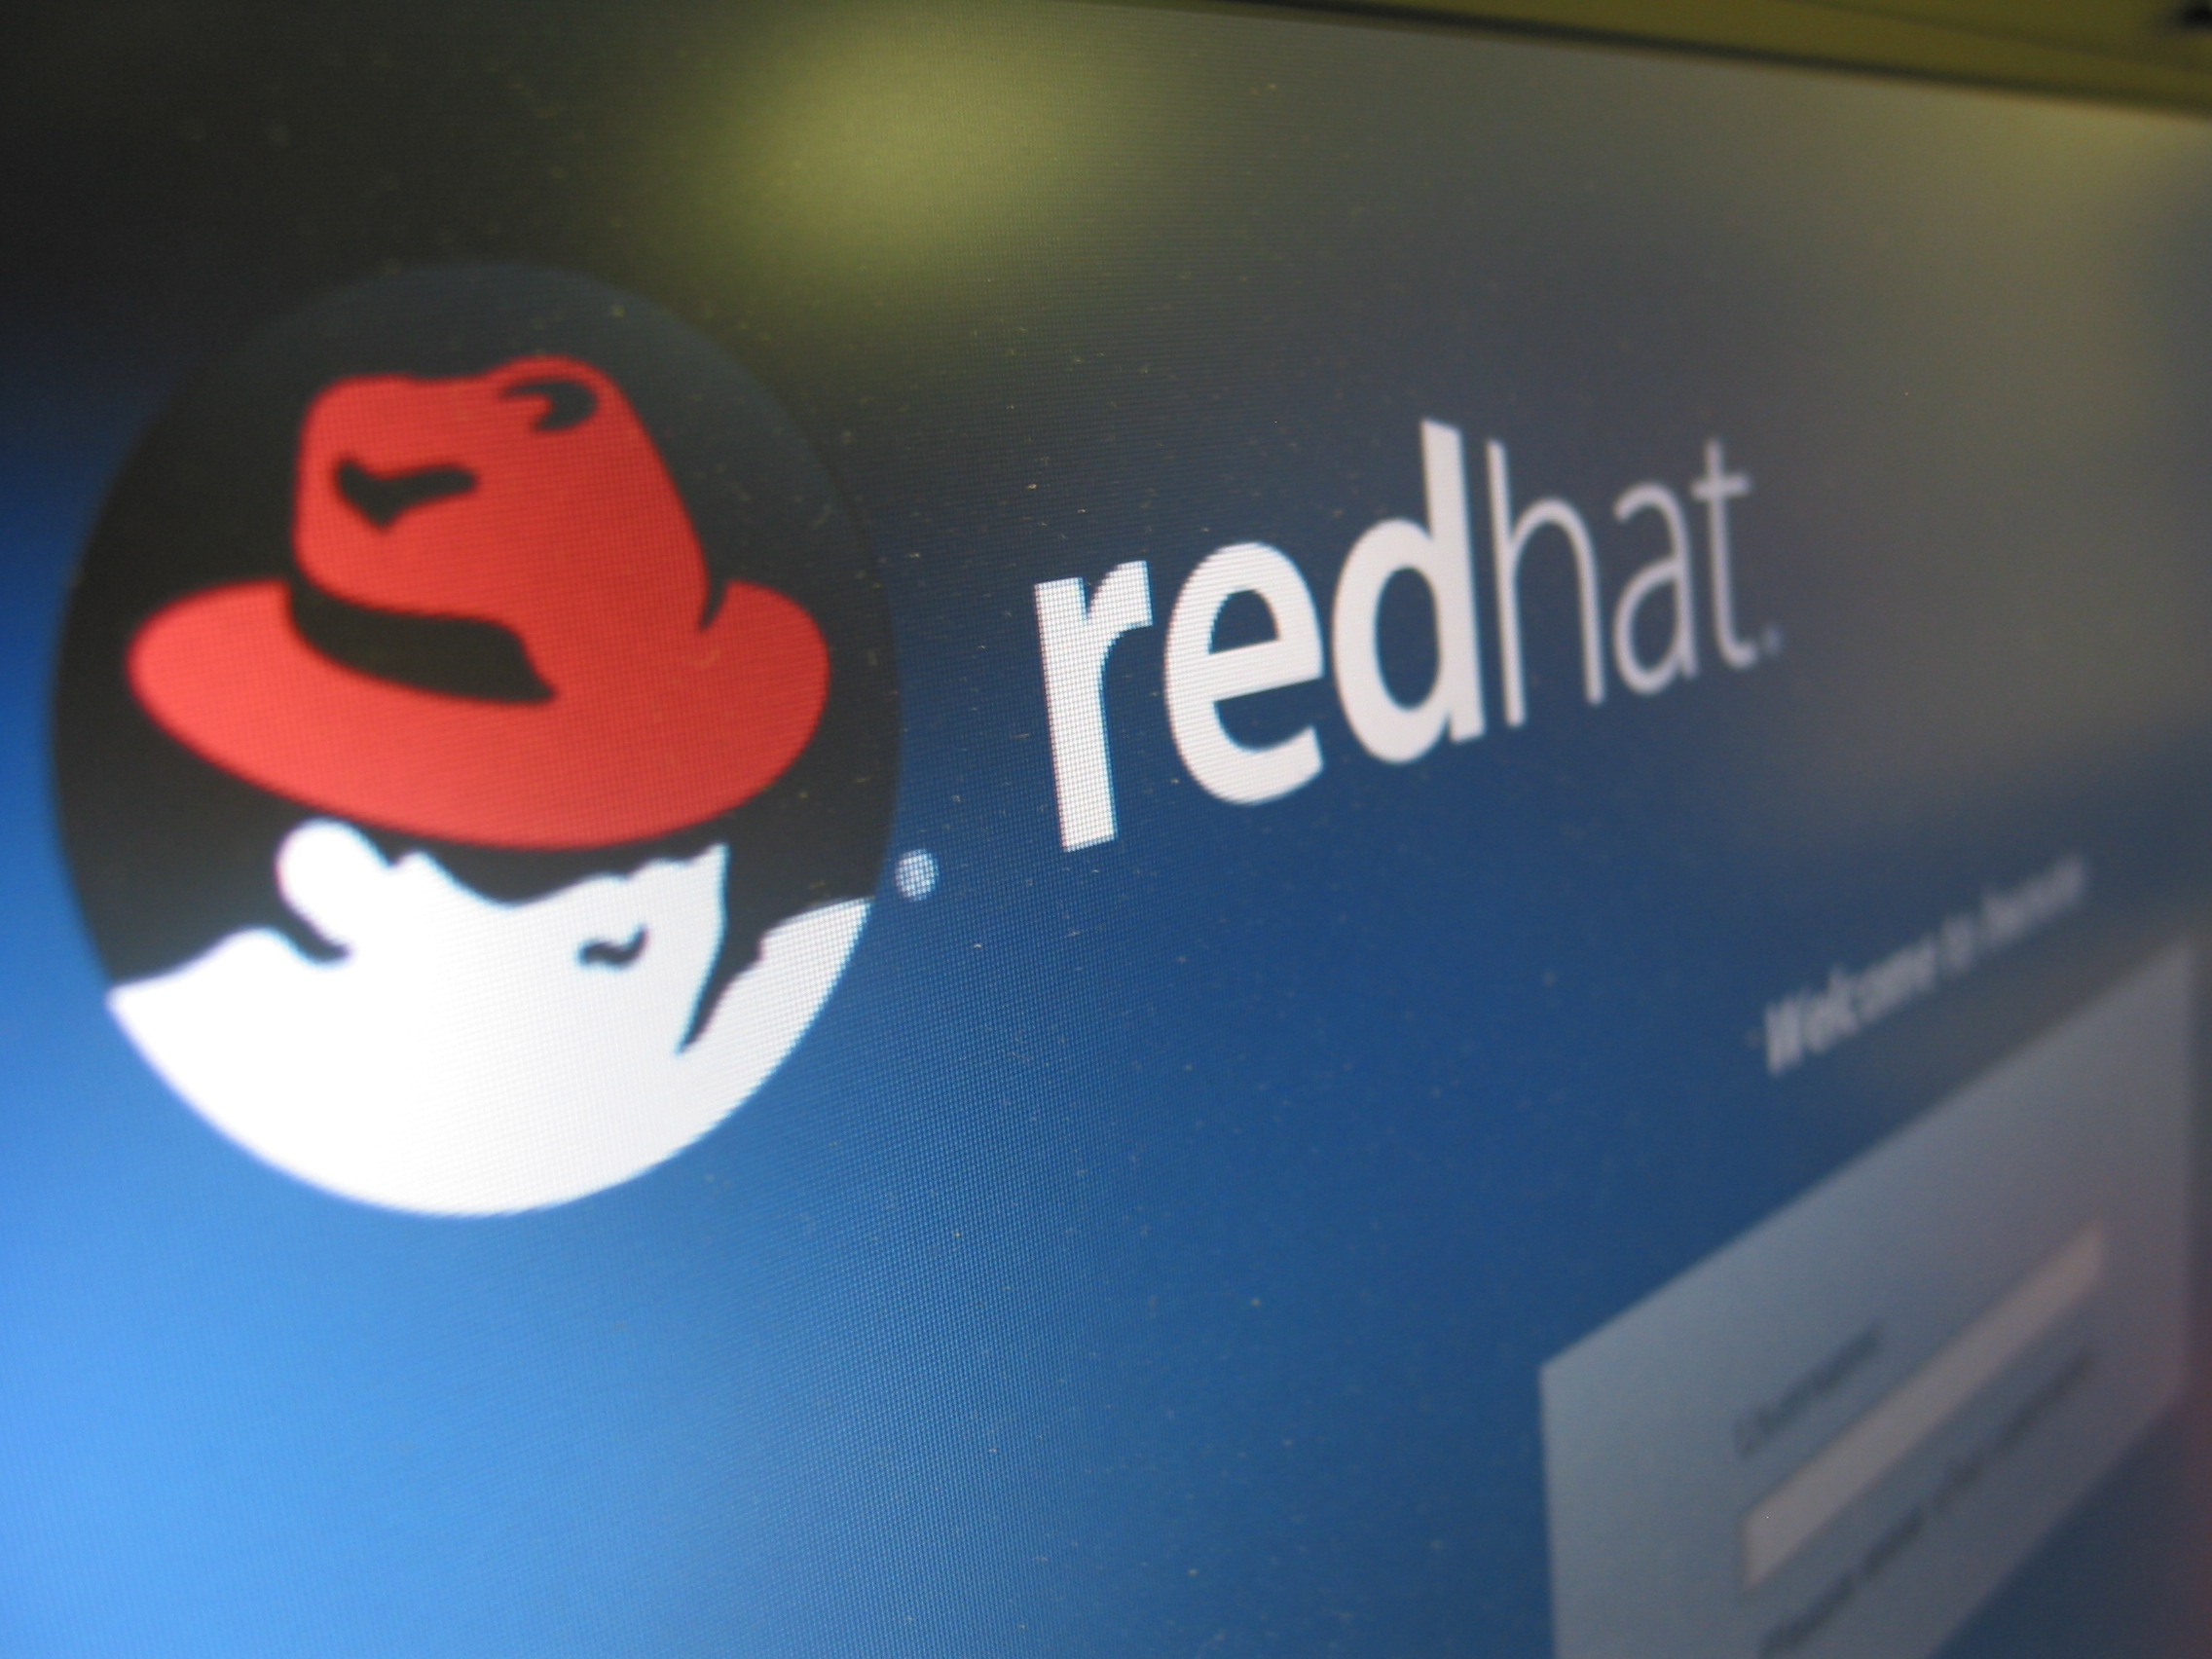 Red hat 7. Линукс Red hat. Дистрибутивы Linux Red hat. Red hat Enterprise Linux. Red hat Enterprise Linux logo.